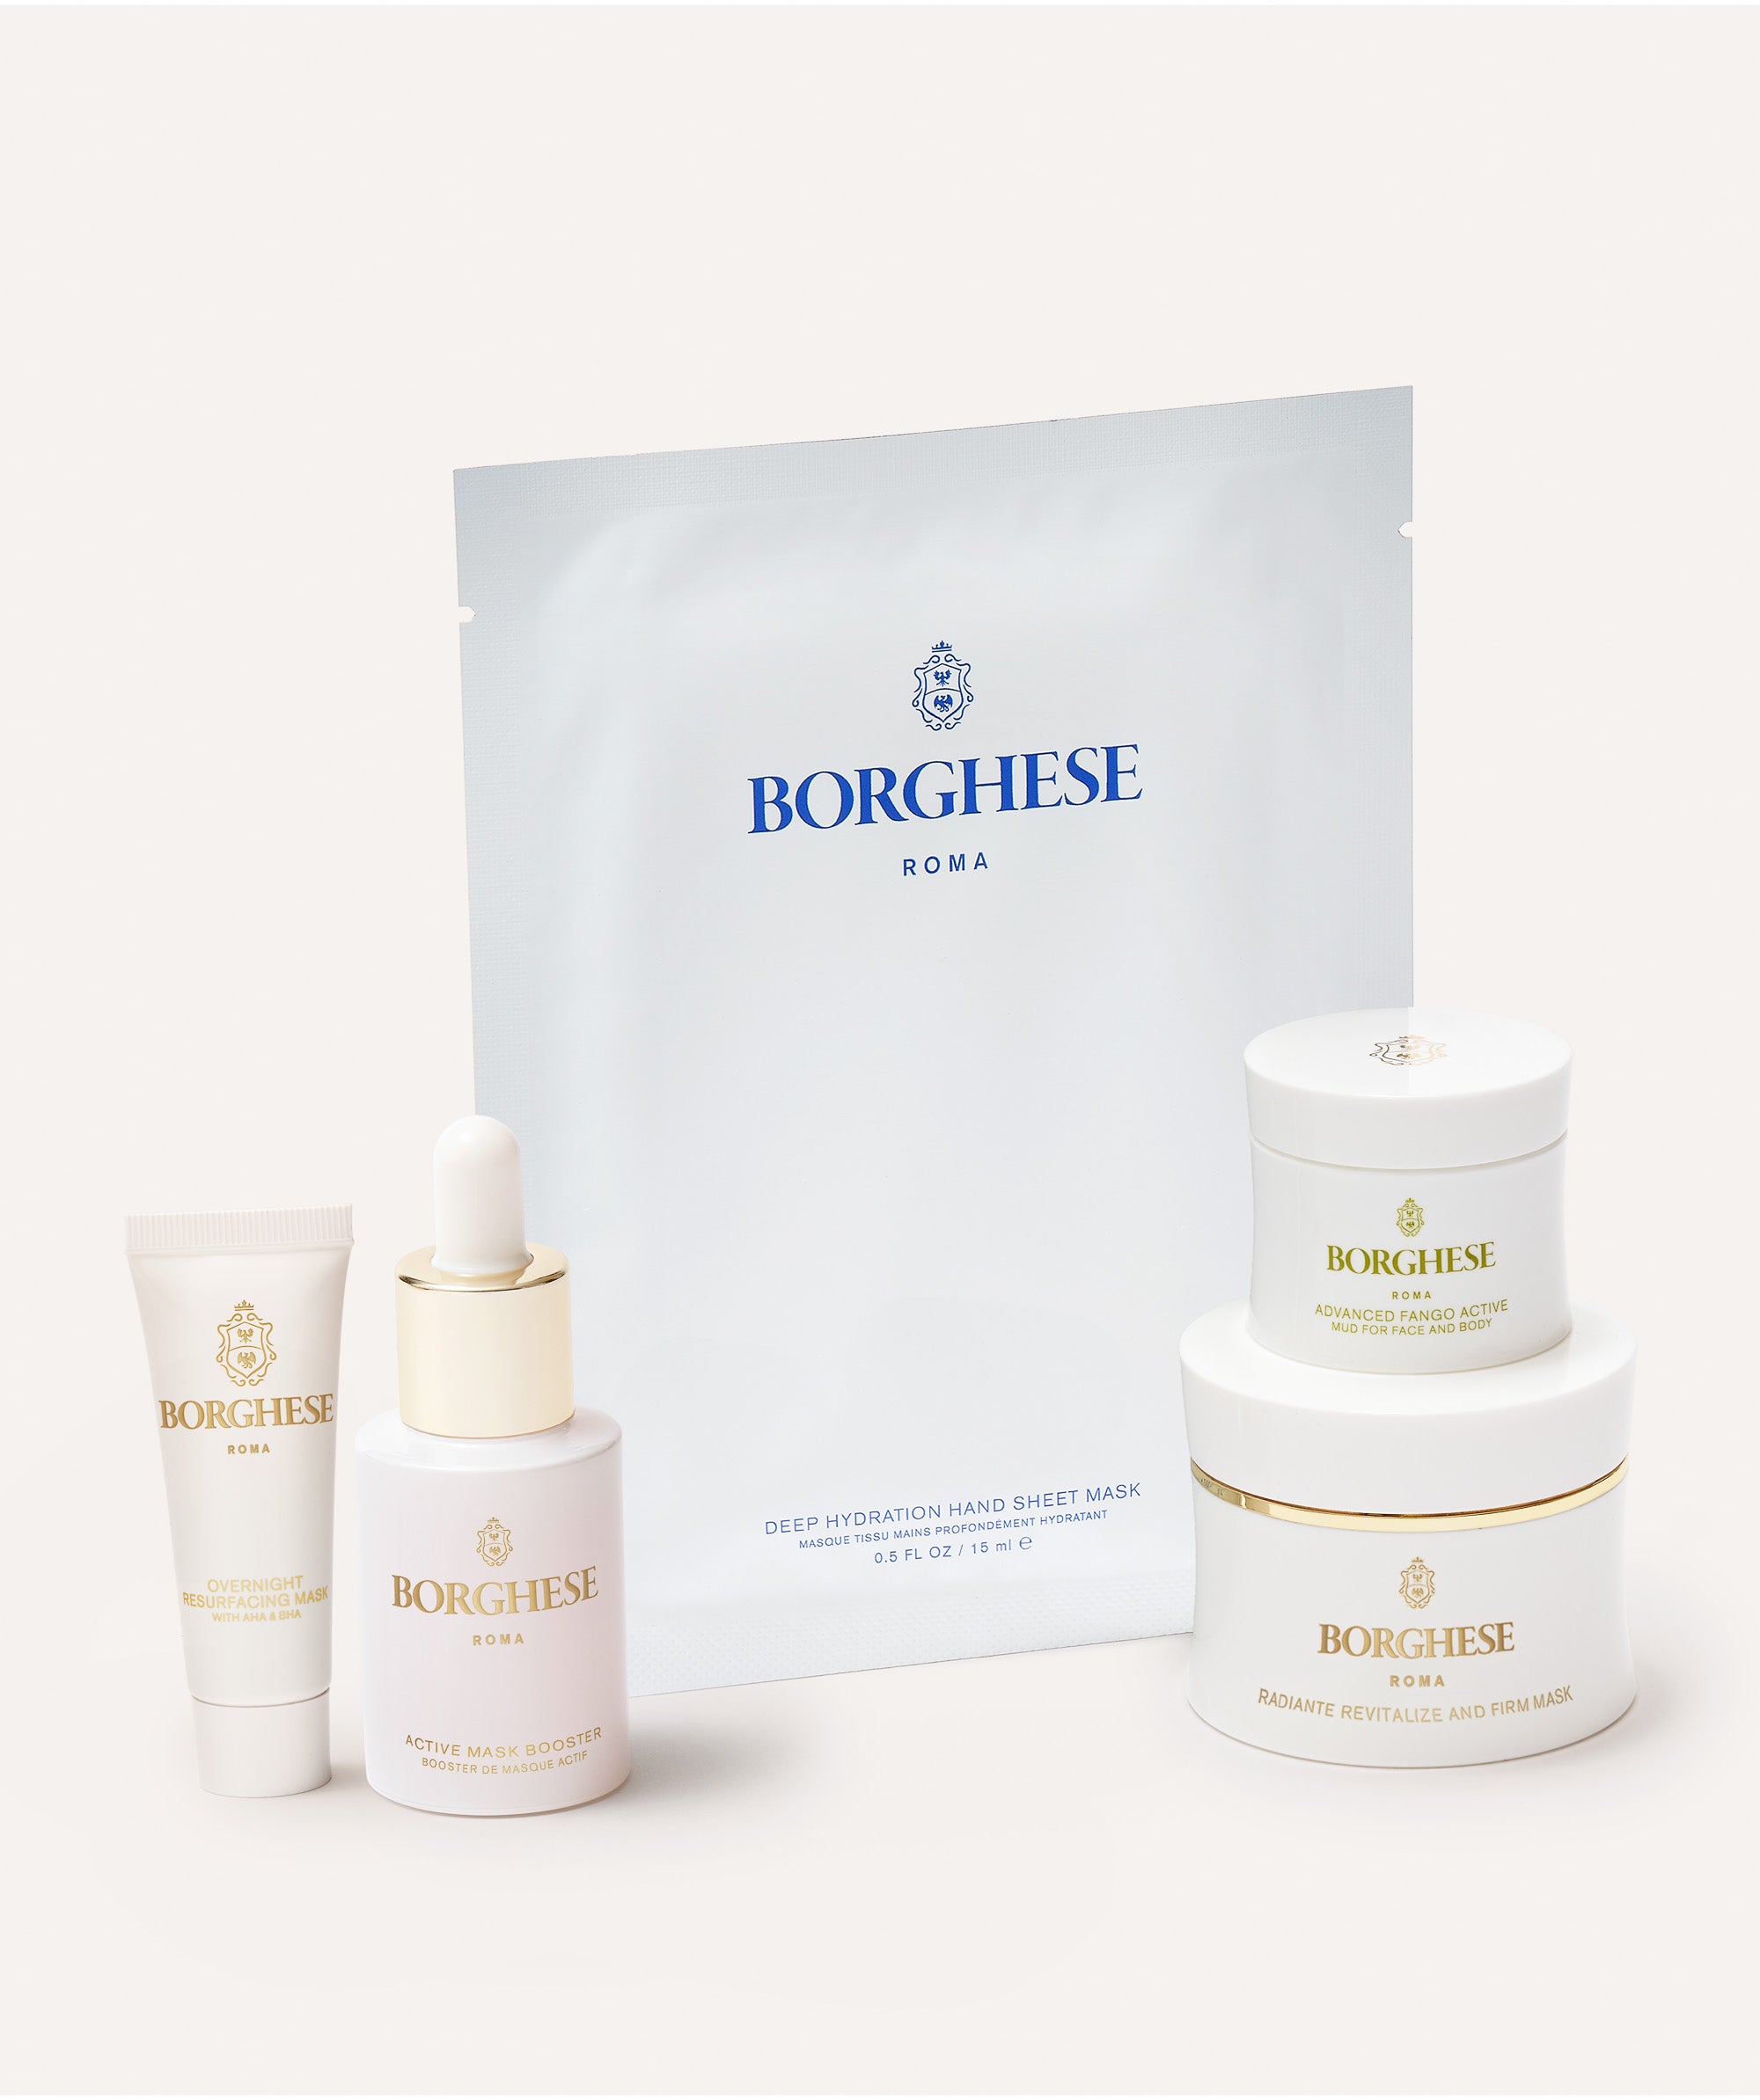 The Borghese Roma 5-Piece All You Need to Mask Gift Set contents 